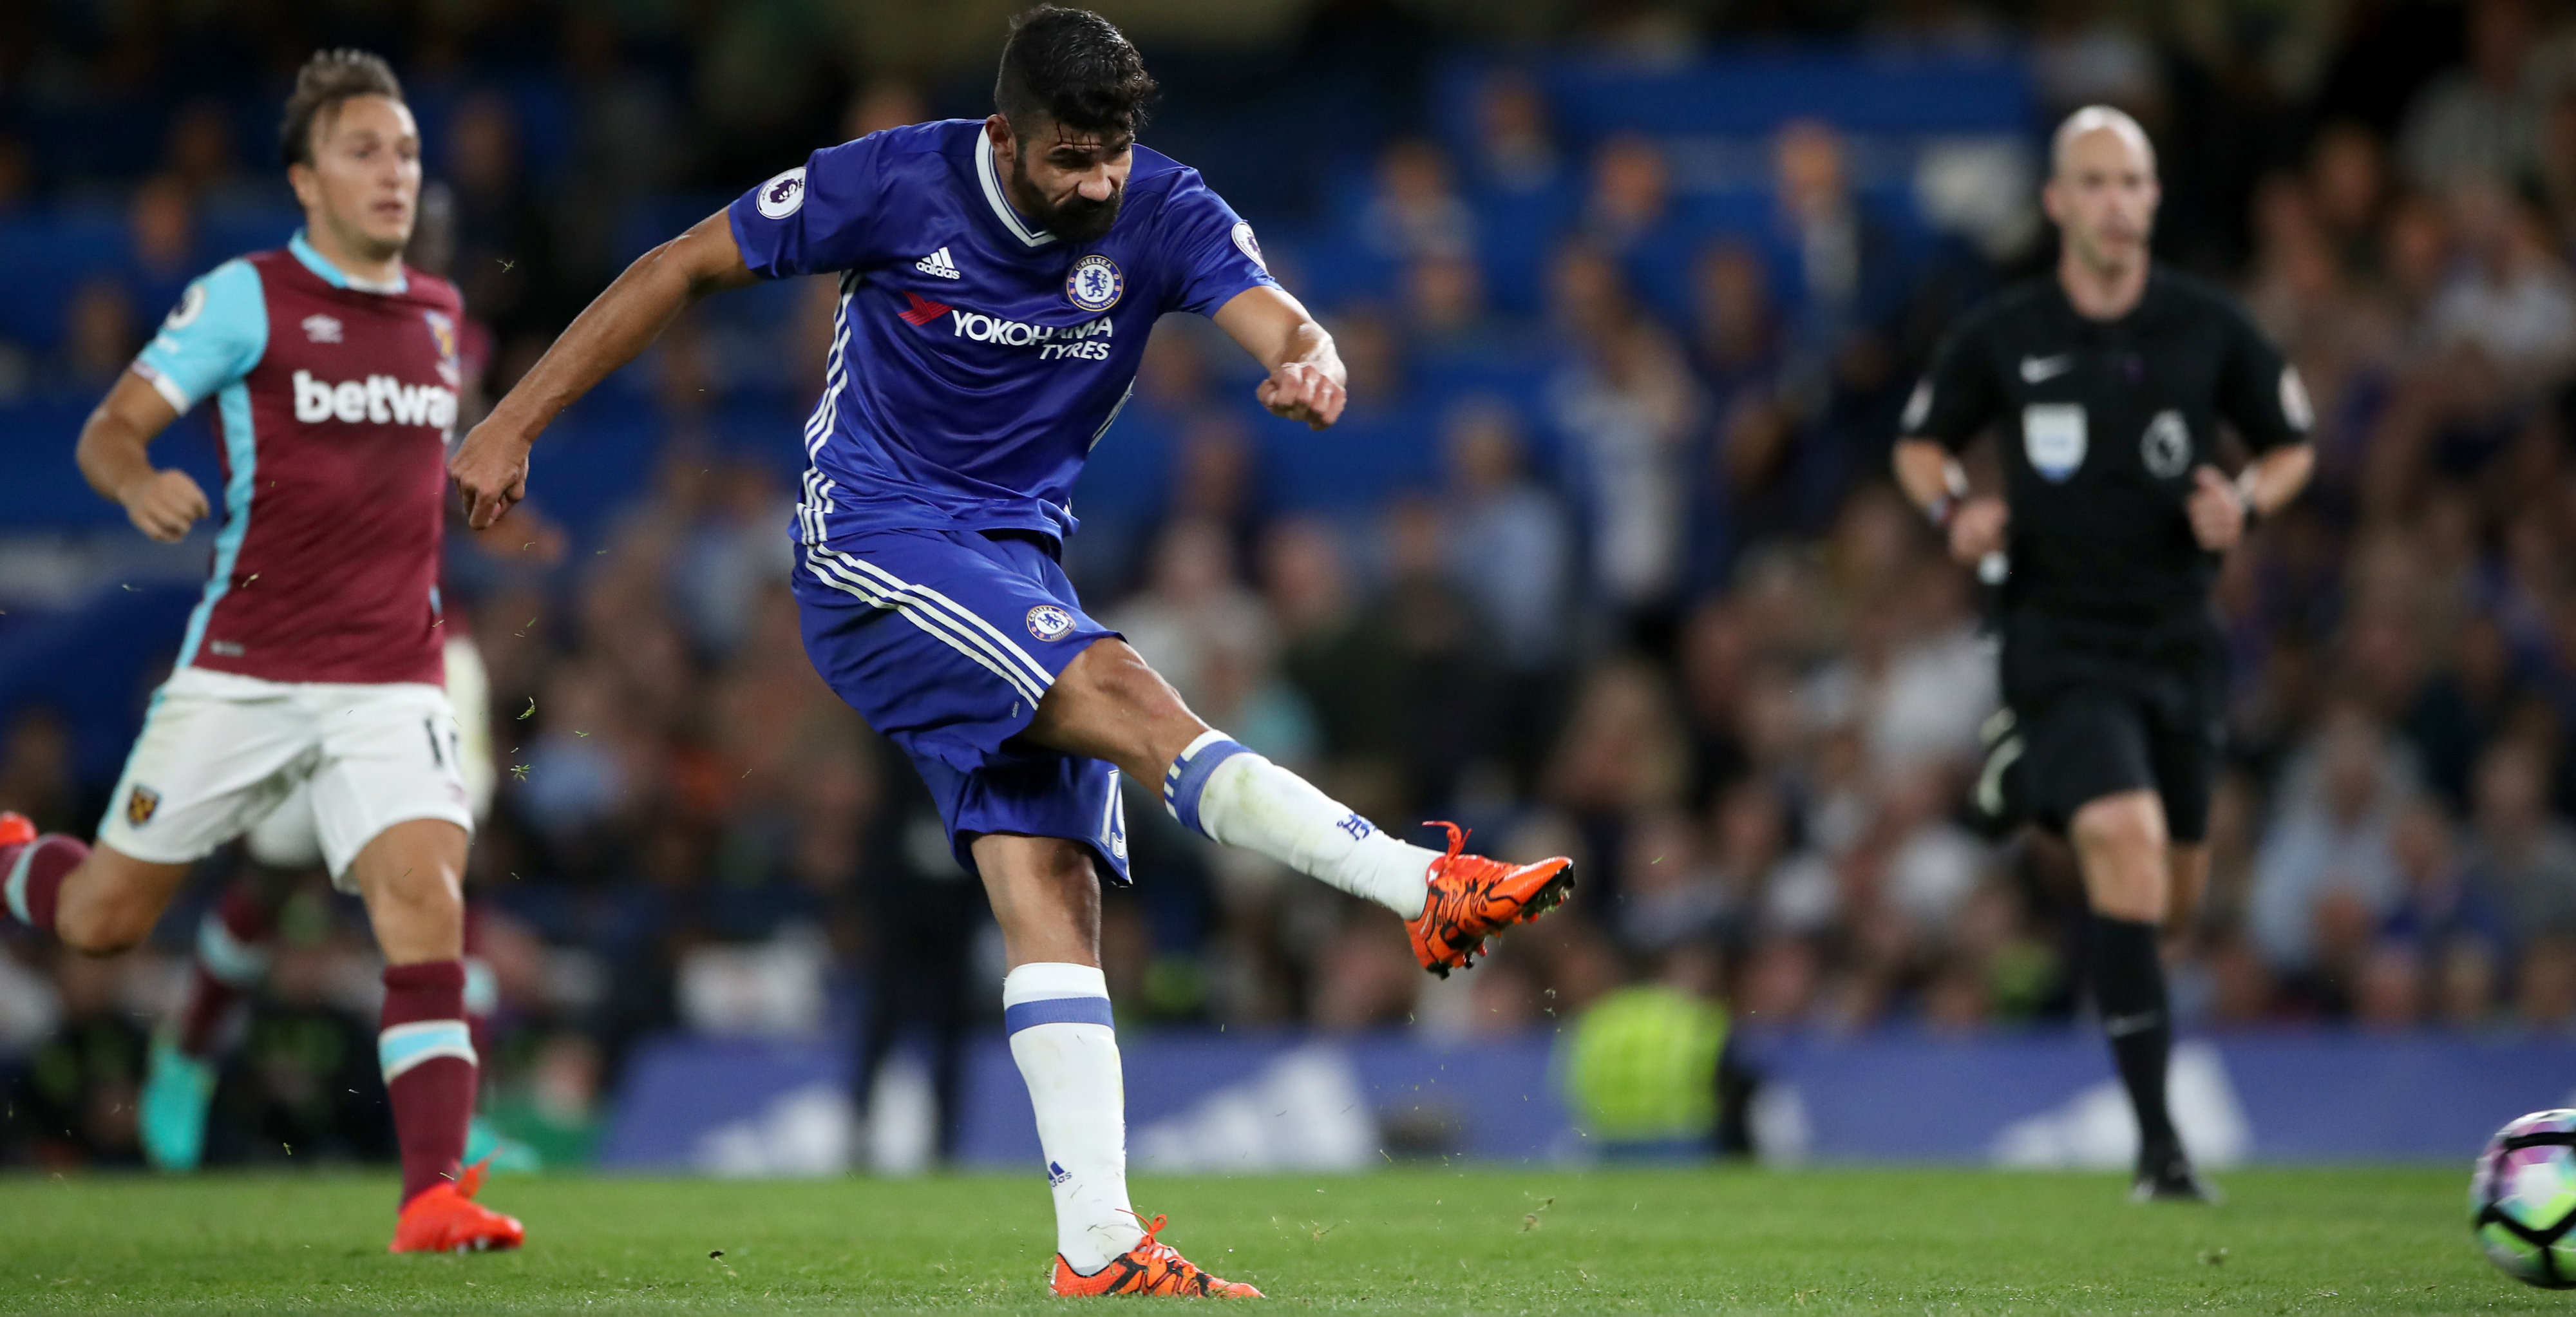 Diego Costa fired home the winner in the final minute